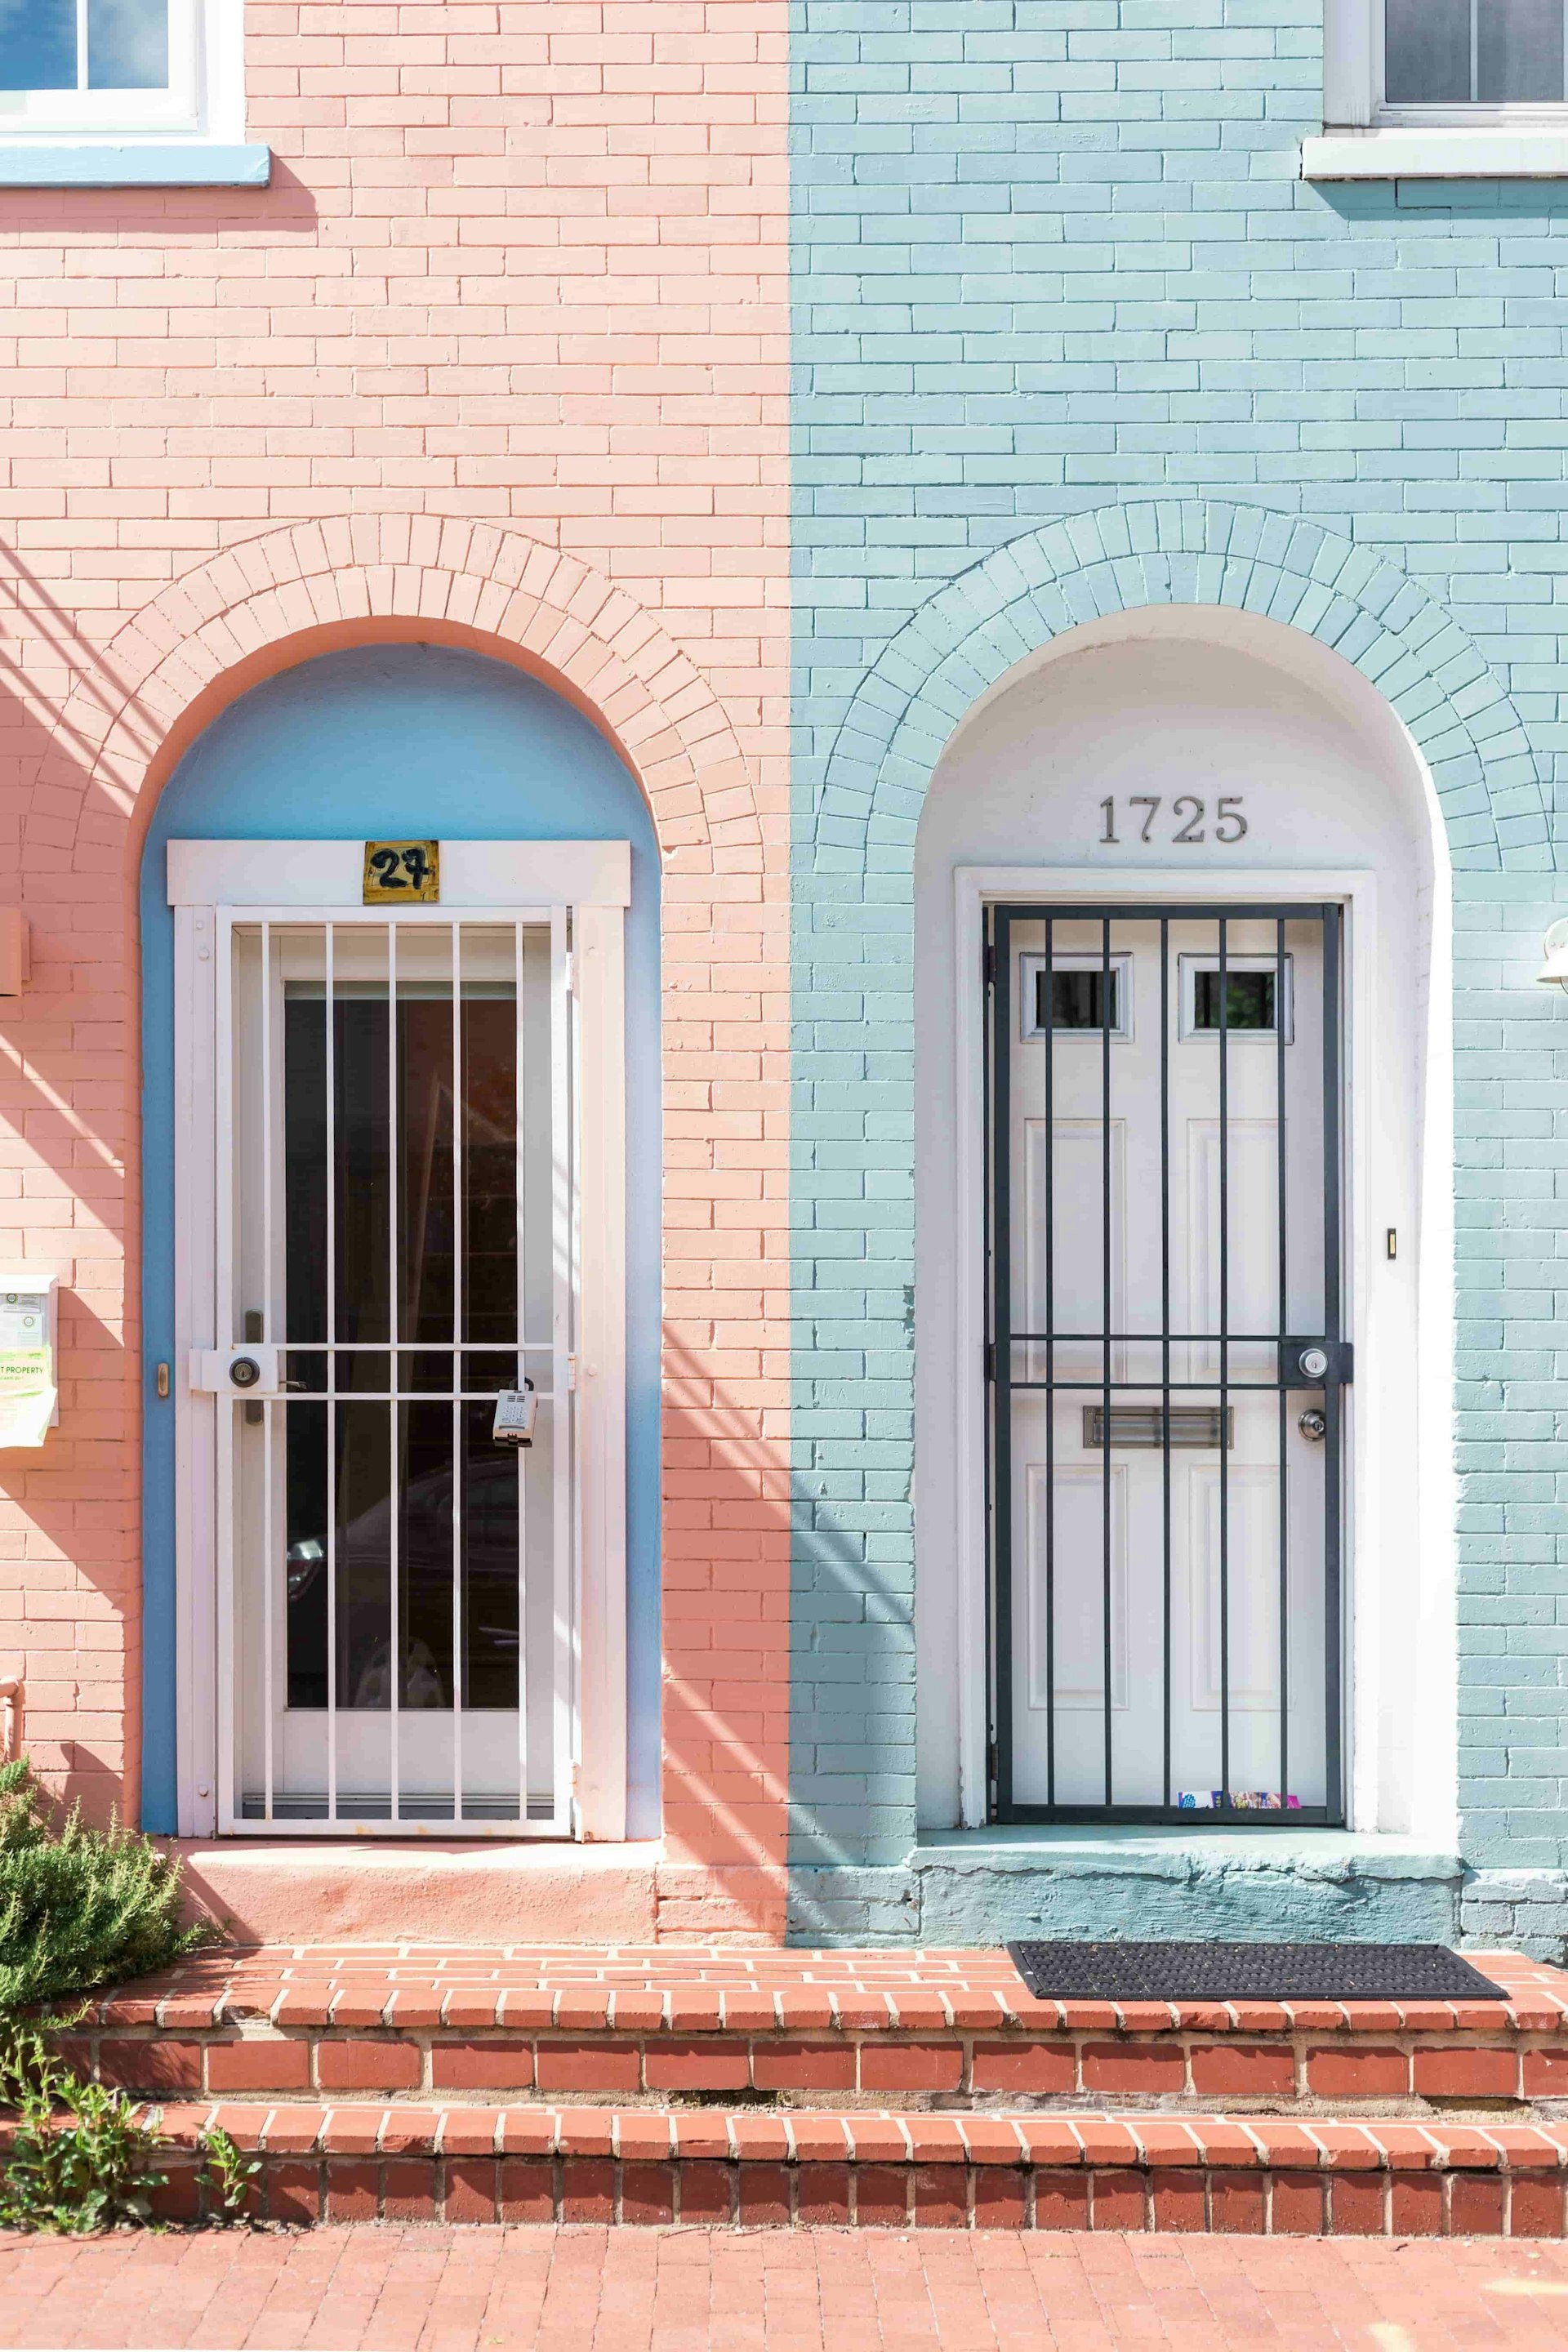 Two white doors against a blue and pink brick wall.